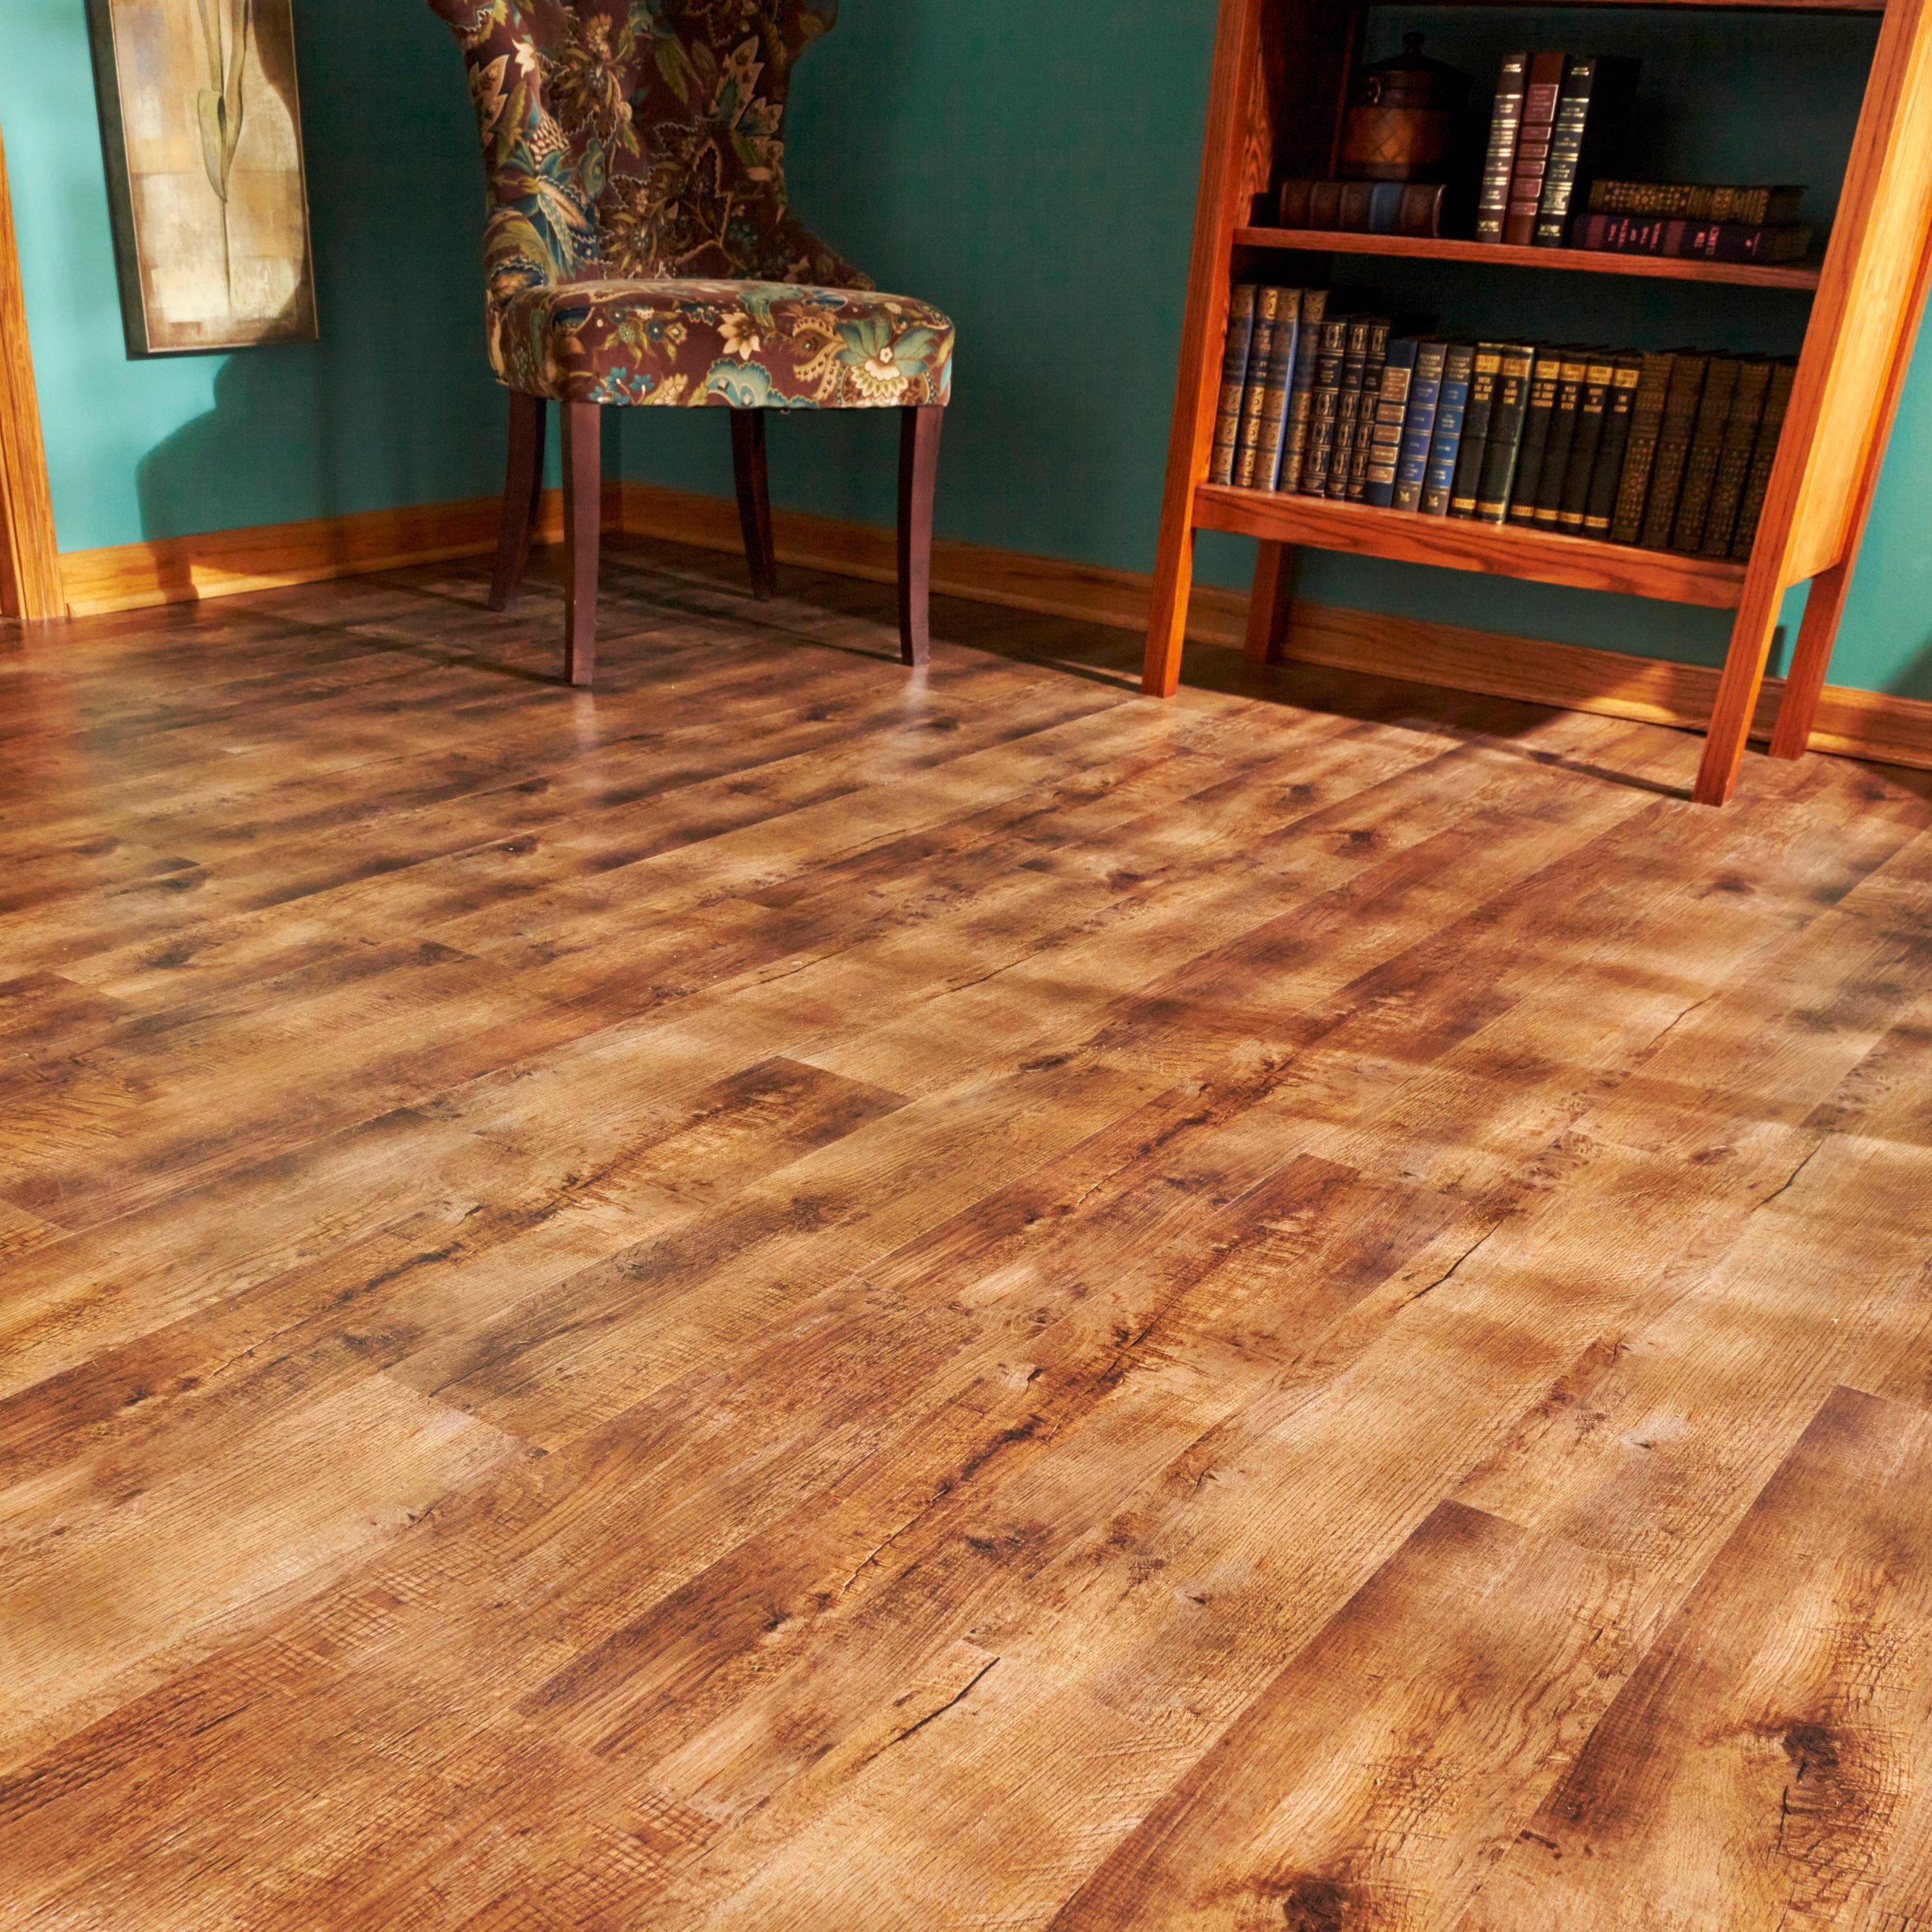 How to Clean Luxury Vinyl Plank Flooring - LVP Pro Cleaning Tips 